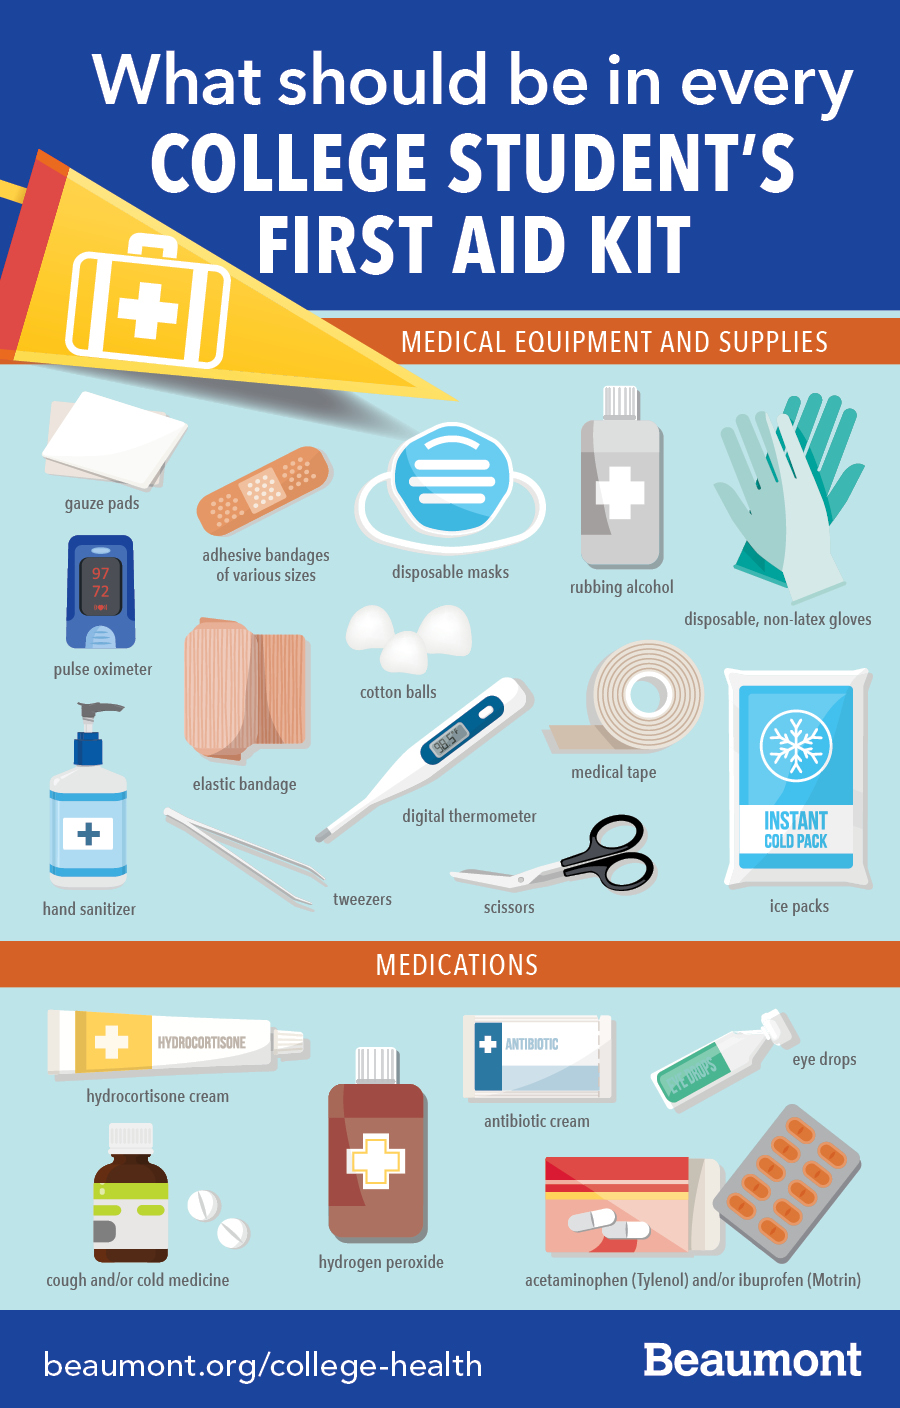 Safety First: Three Tips for Packing the Perfect First Aid Kit